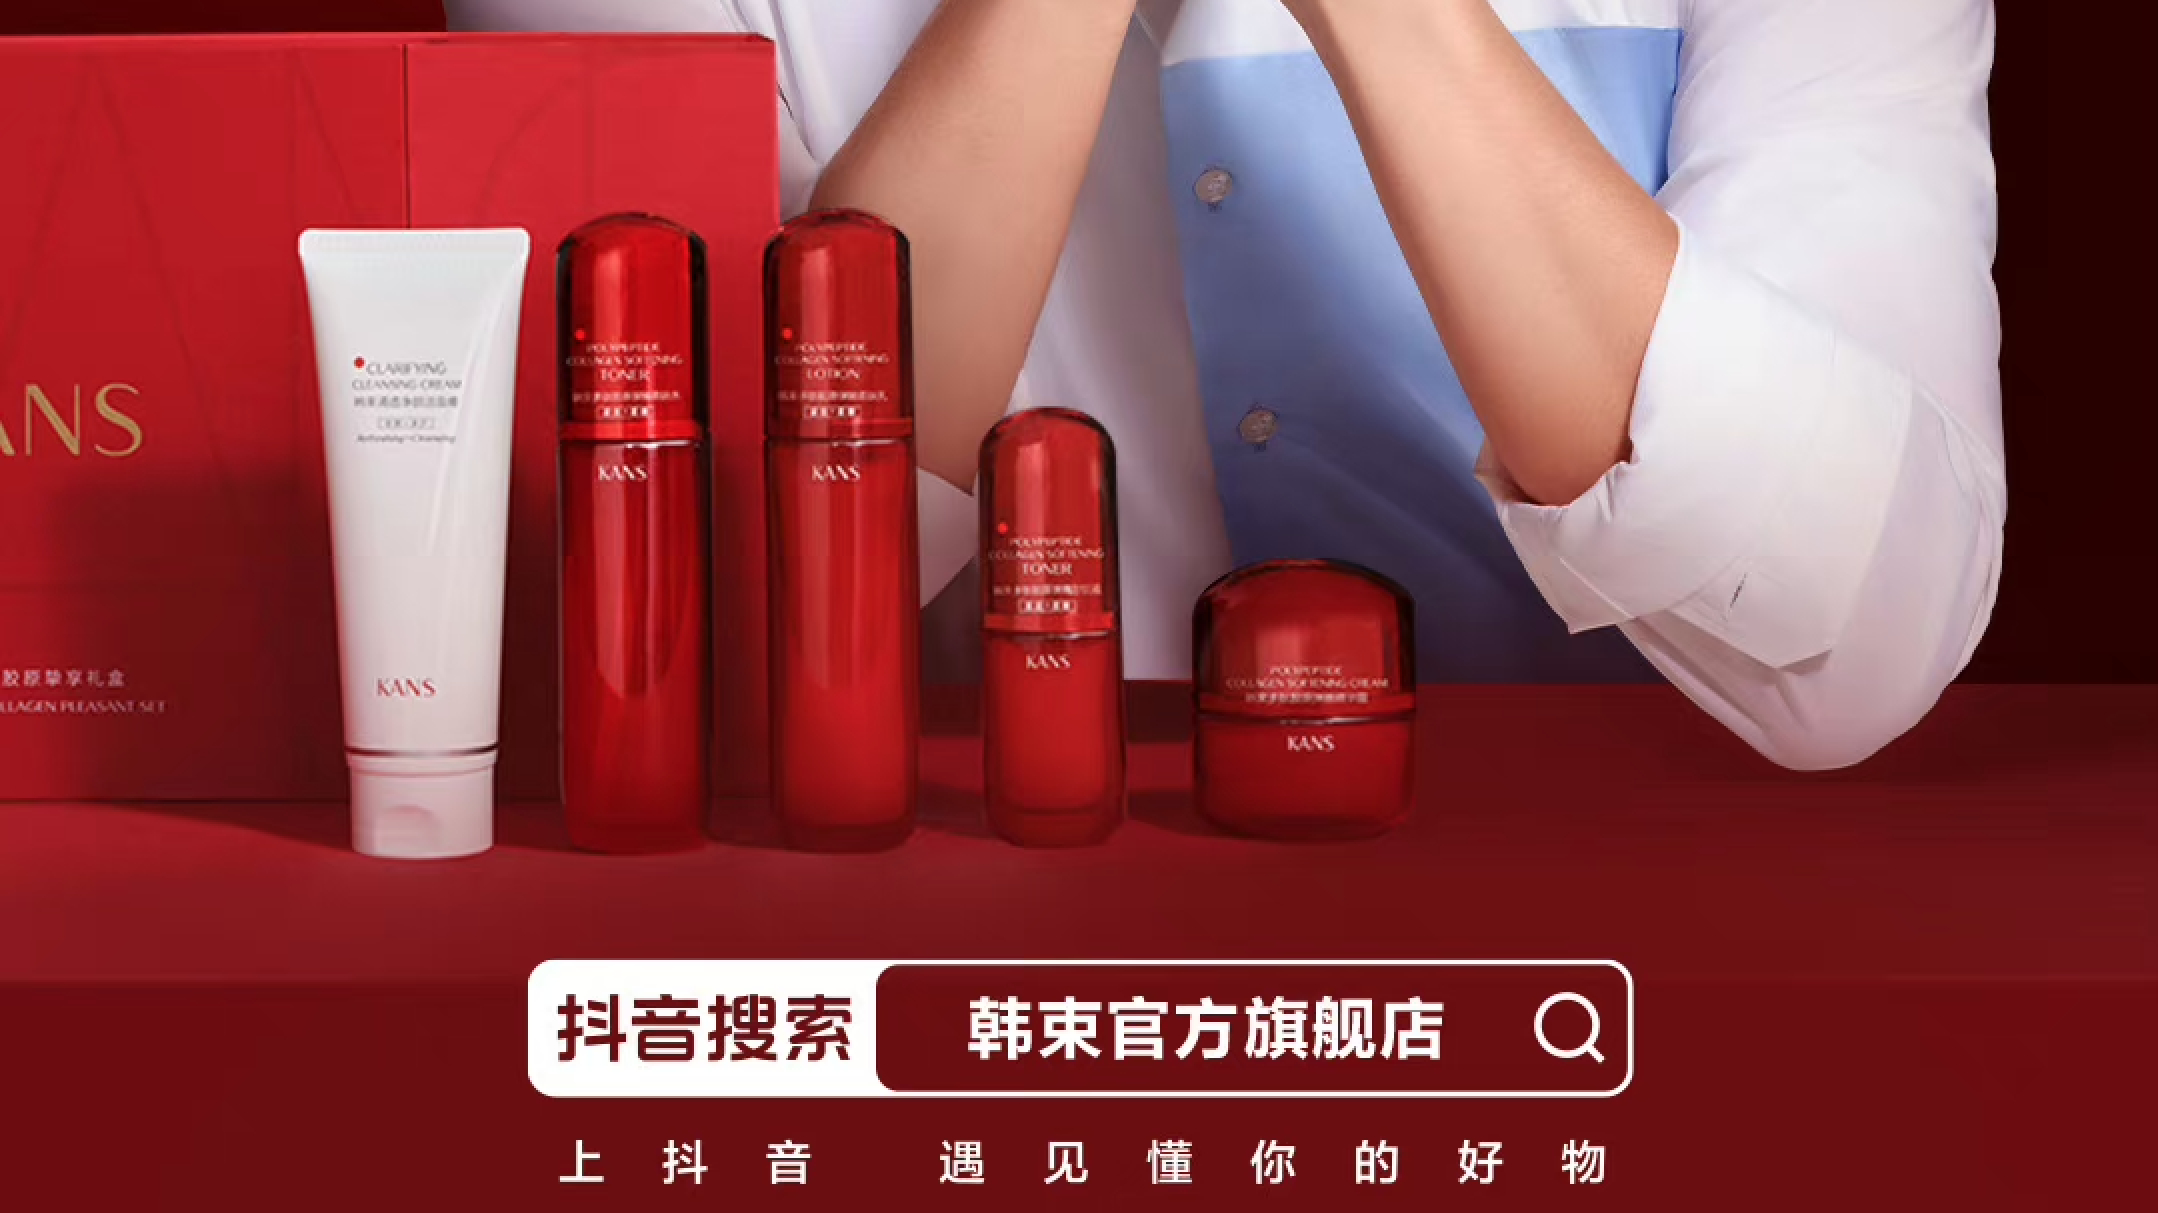 Douyin is rapidly winning market share from rivals Taobao and Tmall. In the first three quarters of 2023, Douyin Beauty’s GMV climbed 44 percent YoY to $15.4 billion. Image: Kans Weibo